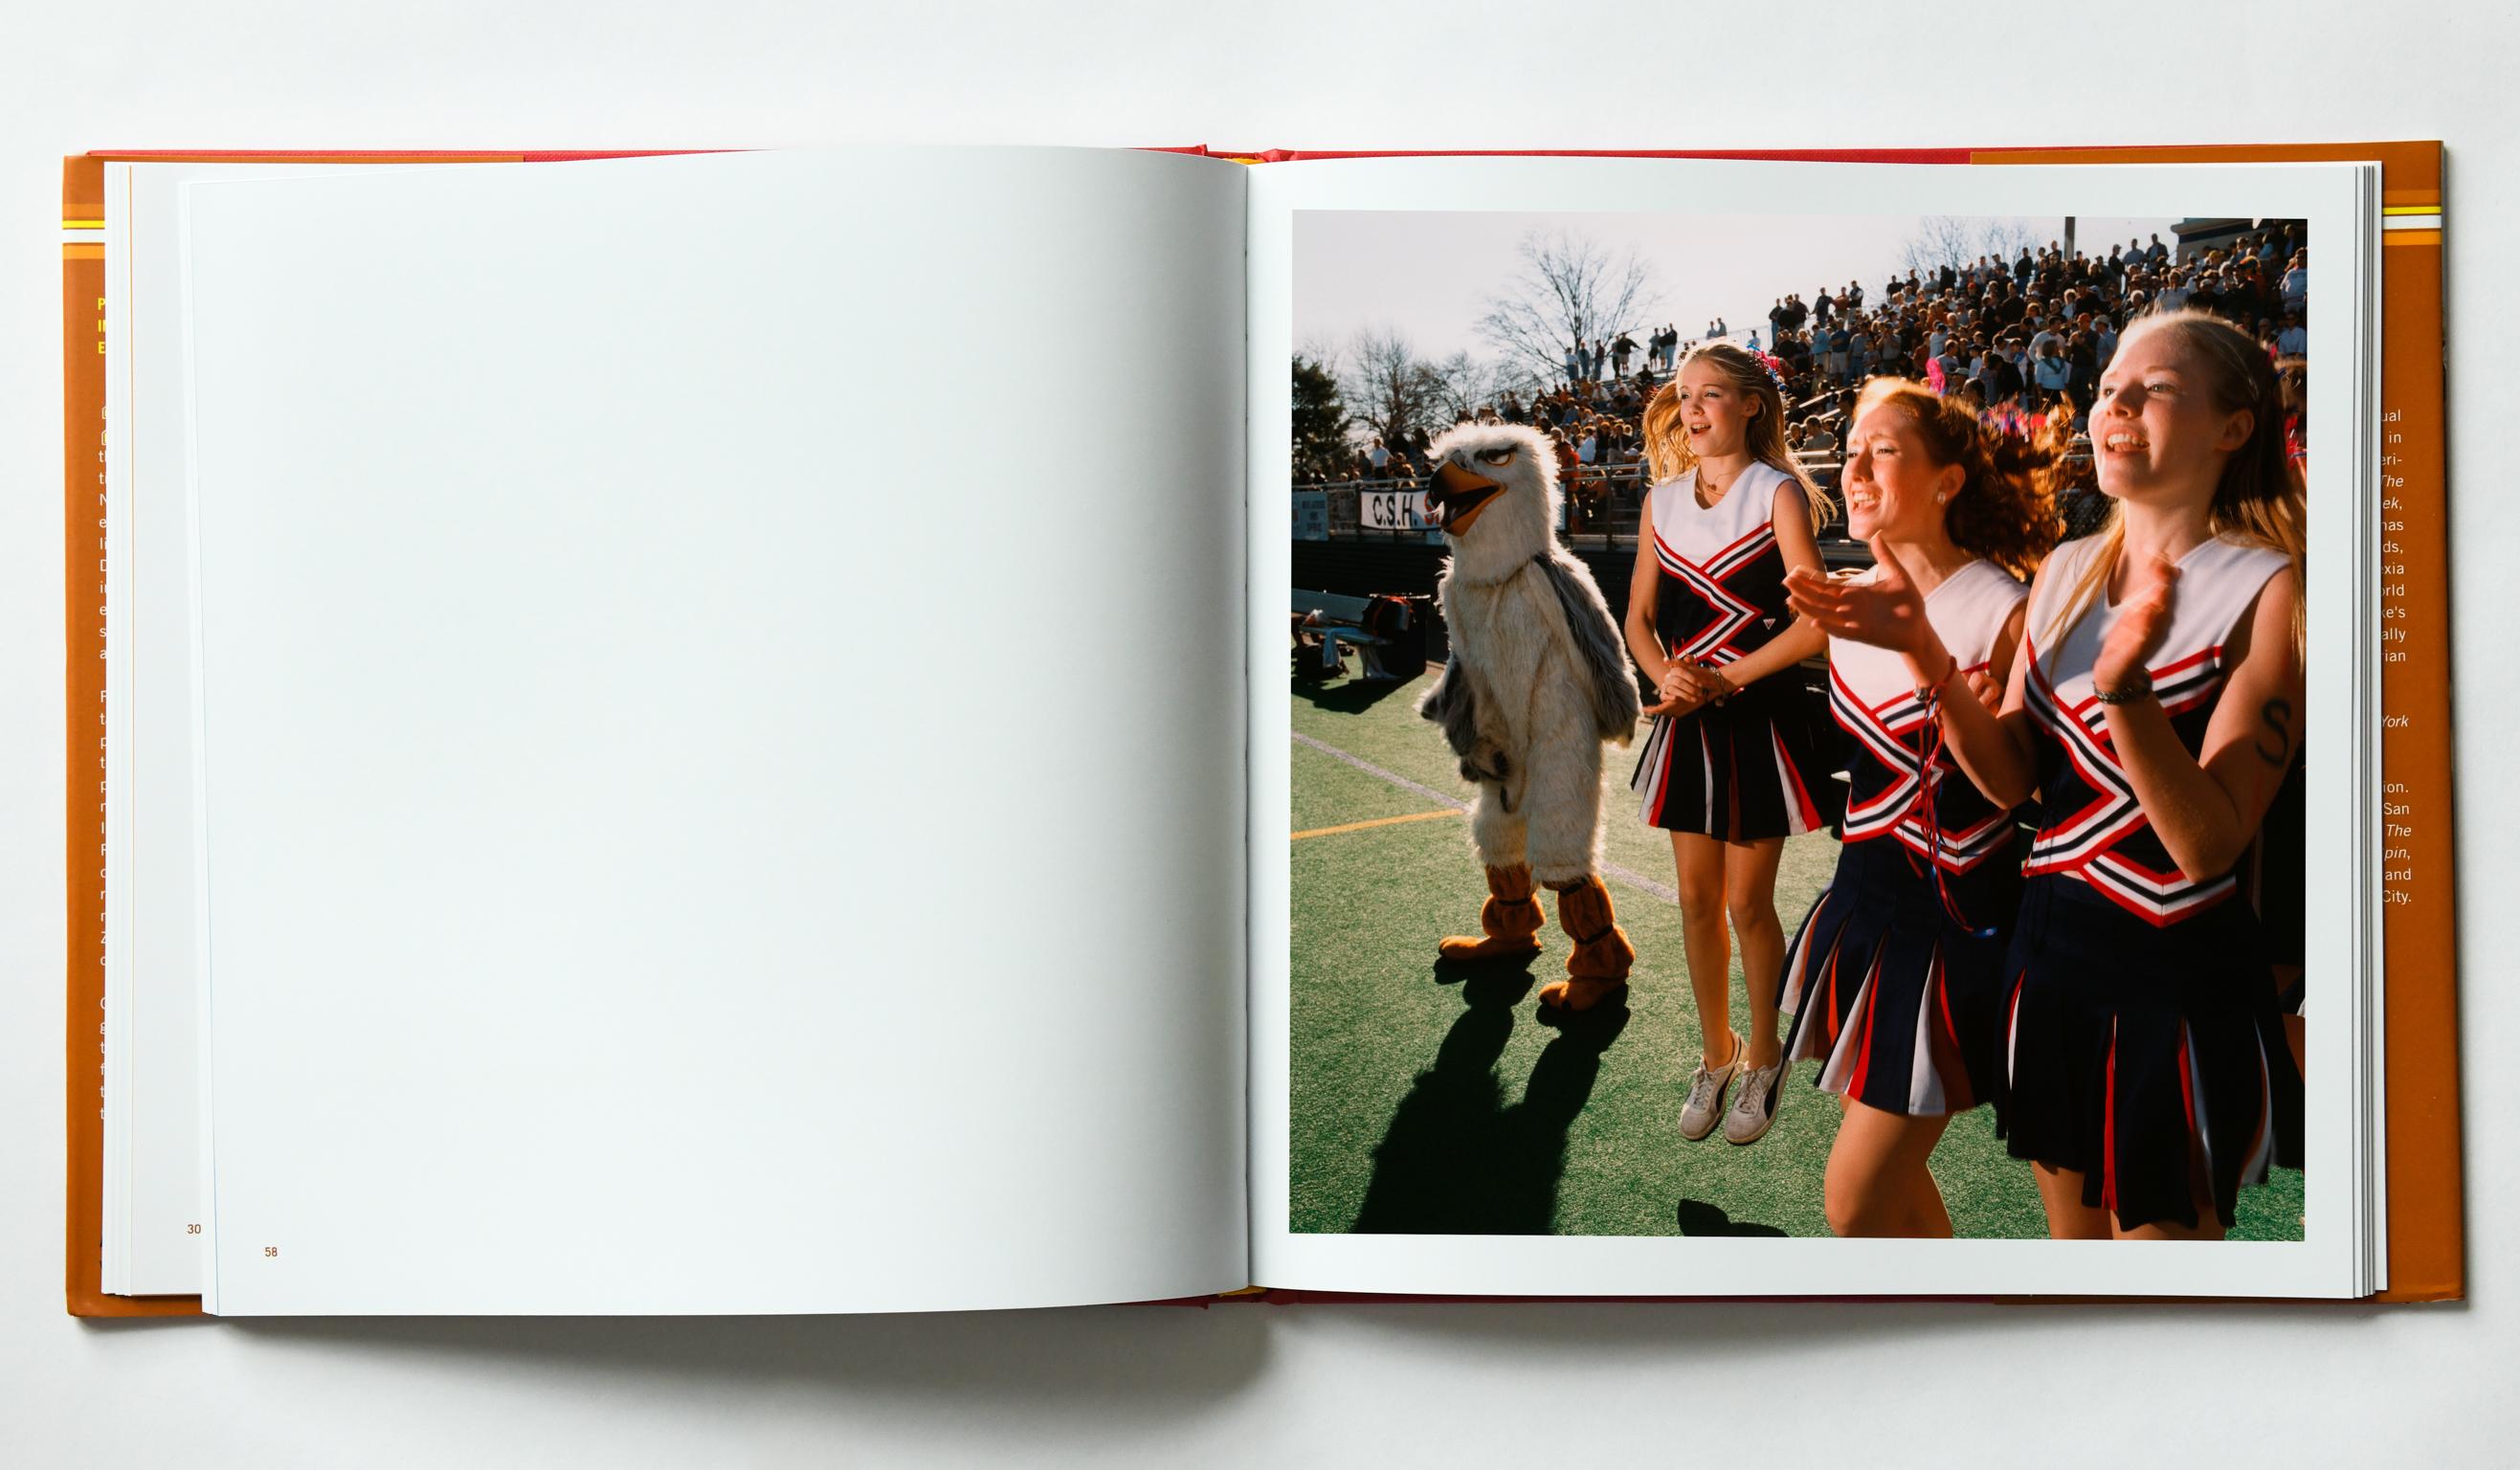 2.4.6.8: American Cheerleaders & Football Players 
Umbrage Editions, 2003
128 pages, 10.25 x 10.25 in
65 color photographs
Signed, $125

Brian Finke’s first monograph, 2-4-6-8: American Cheerleaders & Football Players.

For several years, artist